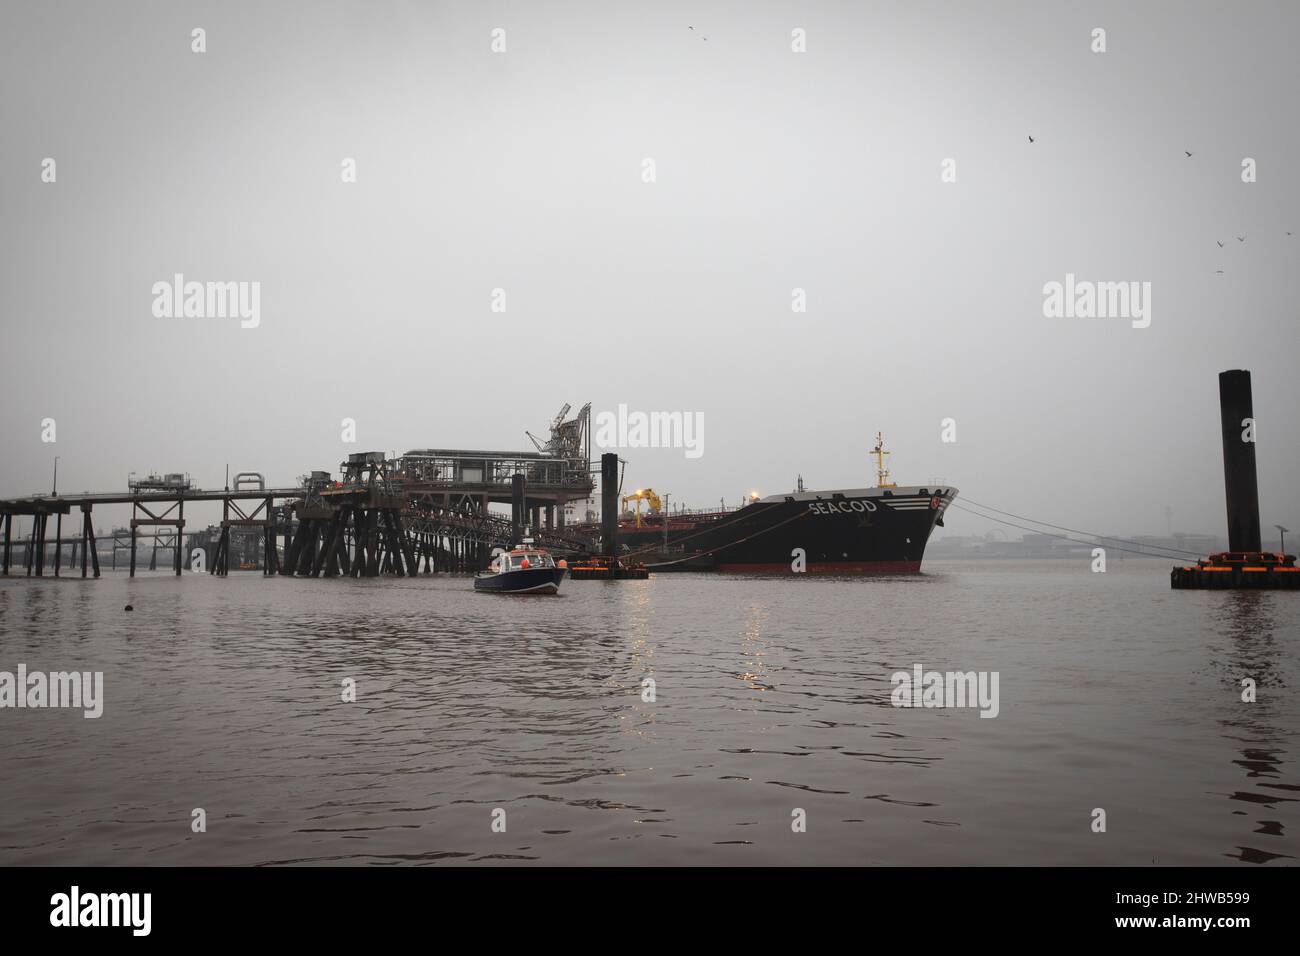 The German flagged tanker Seacod, berthed at the Tranmere Oil Terminal, Wirral on 3rd March, 2022 and believed to be carrying a cargo of oil which was being transported from the port of Primorsk, Russia. Stock Photo